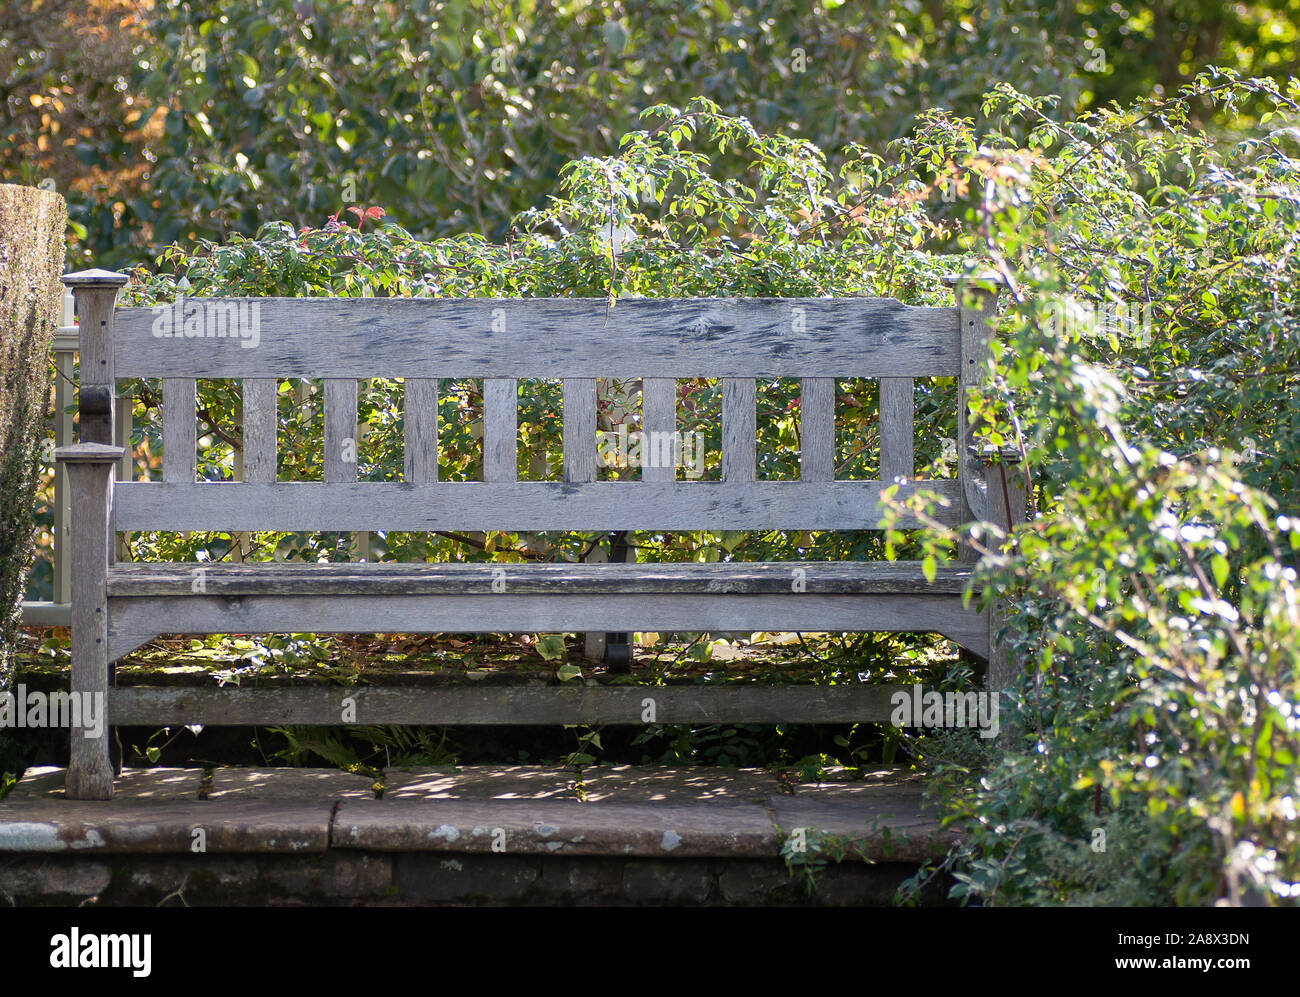 Park bench set against green natural background of plants Stock Photo -  Alamy